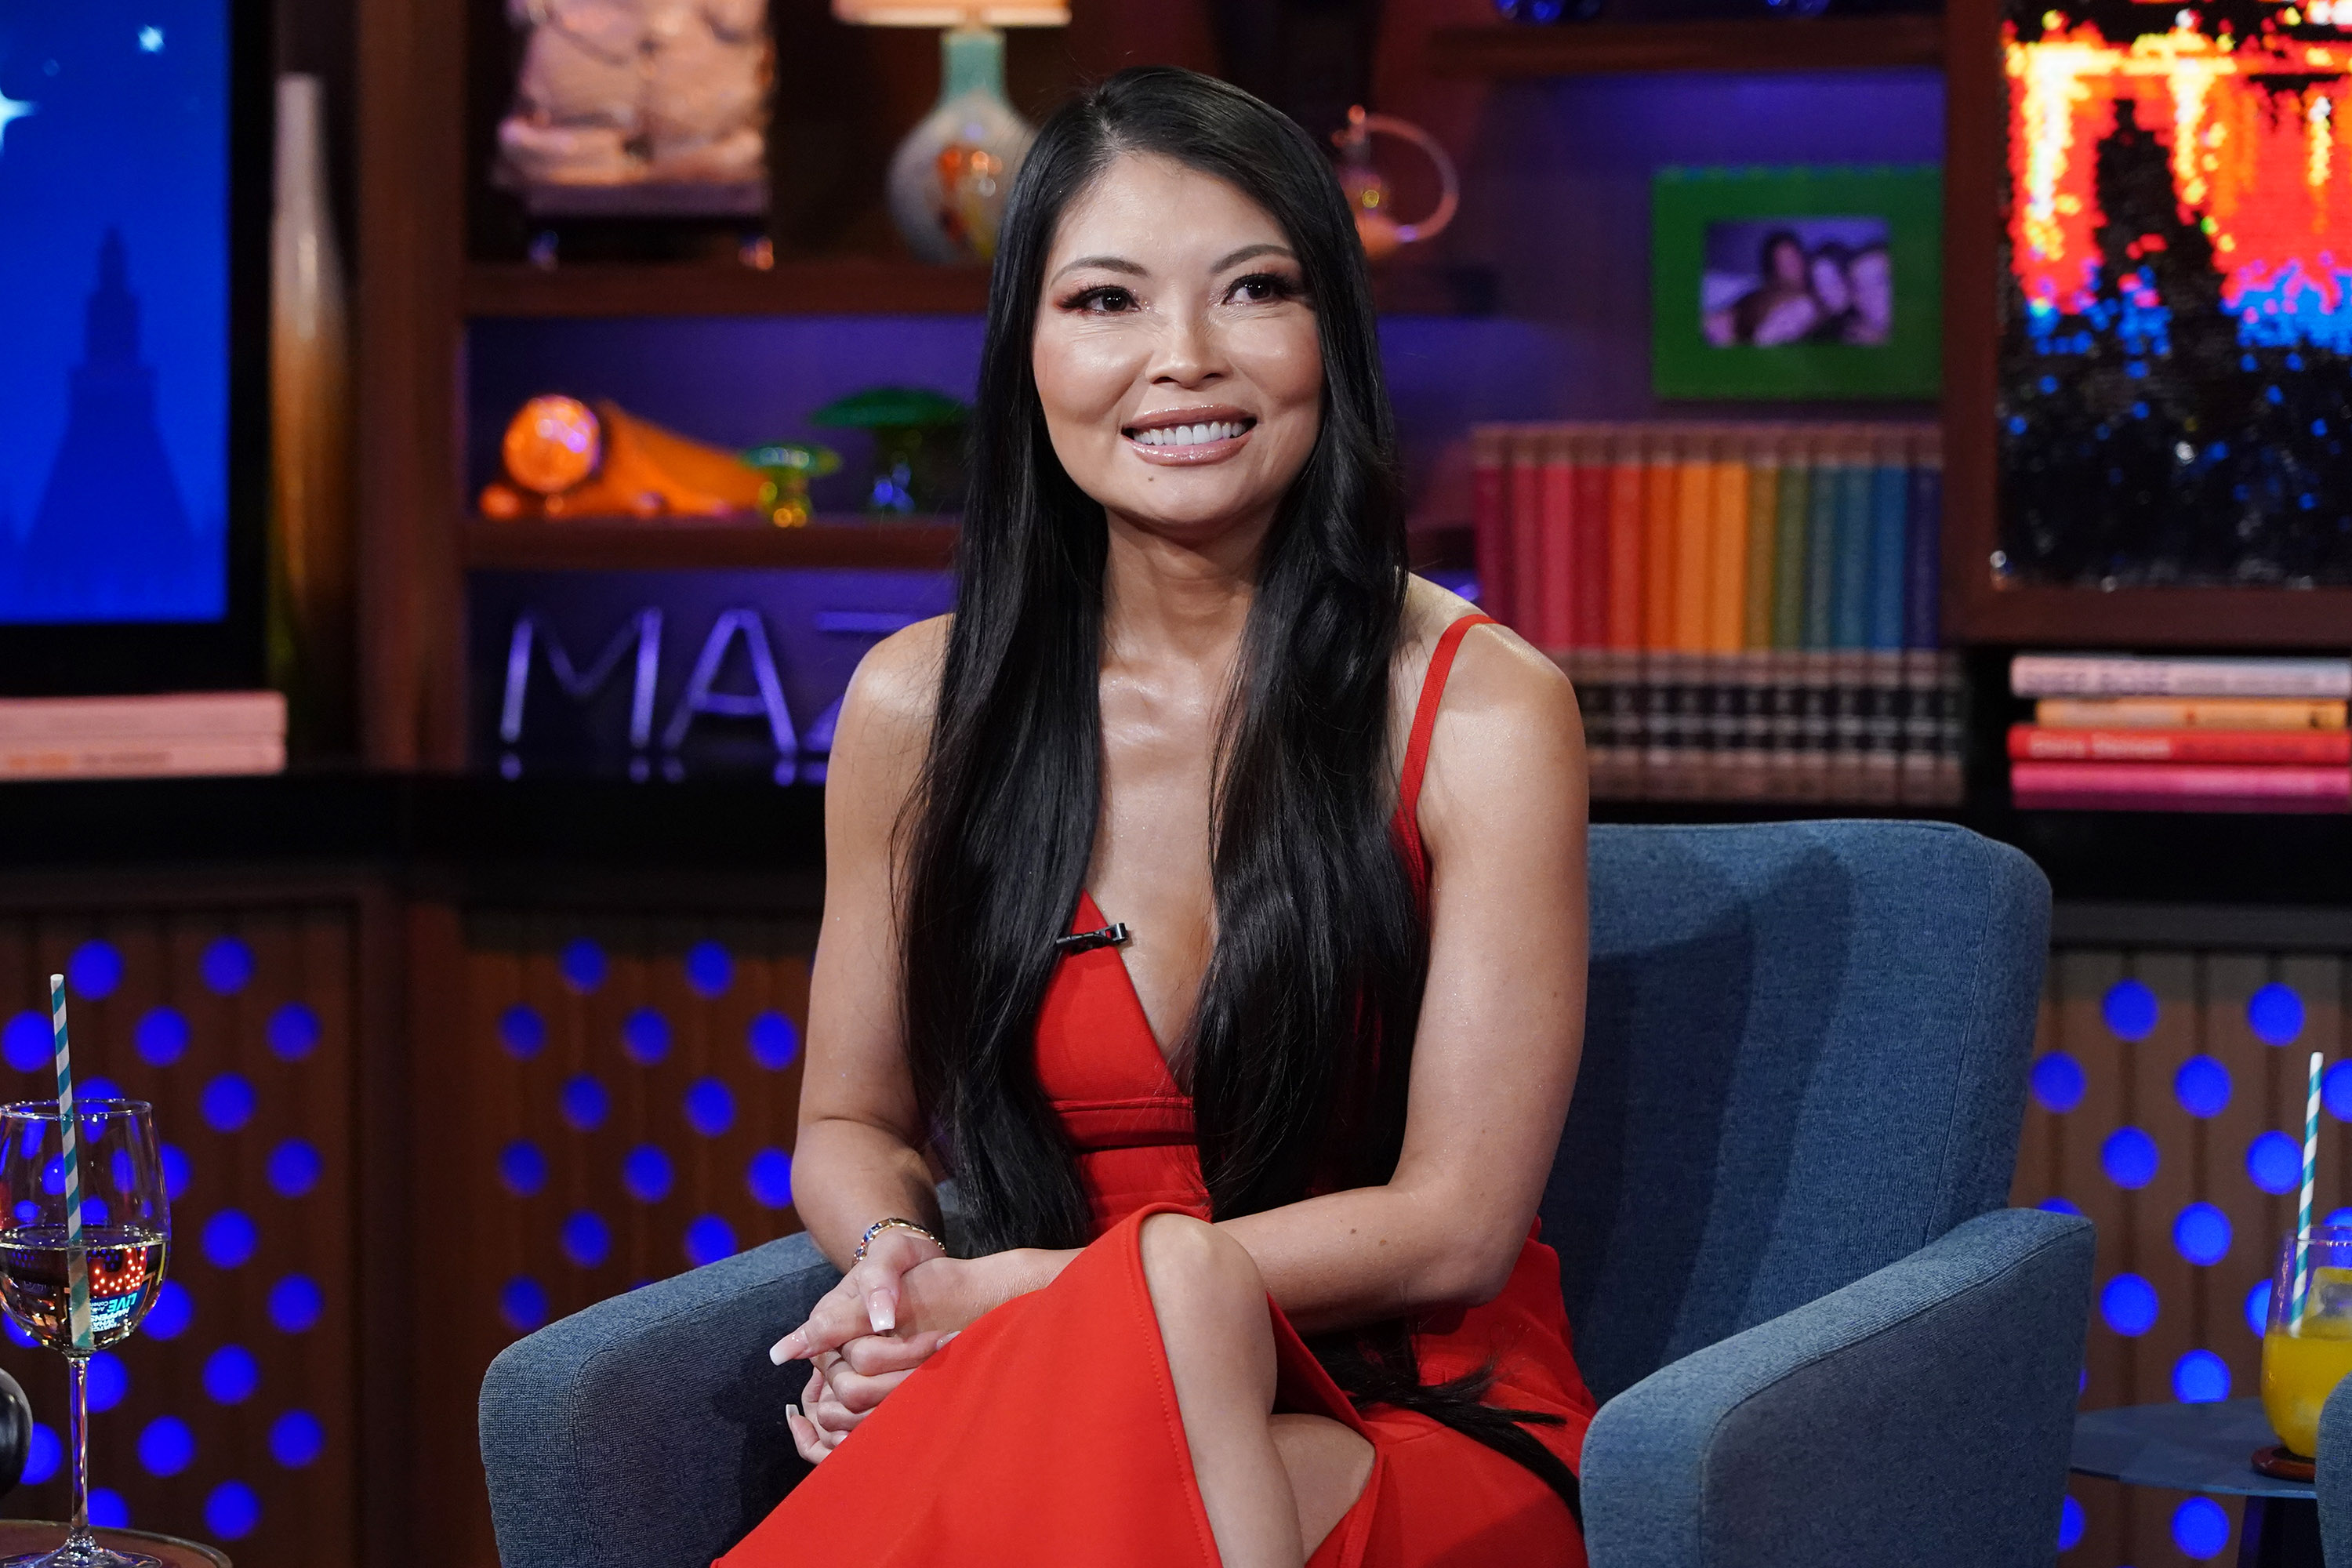 'RHOSLC' star Jennie Nguyen sitting down and smiling on the set of 'Watch What Happens Live With Andy Cohen' - Season 18